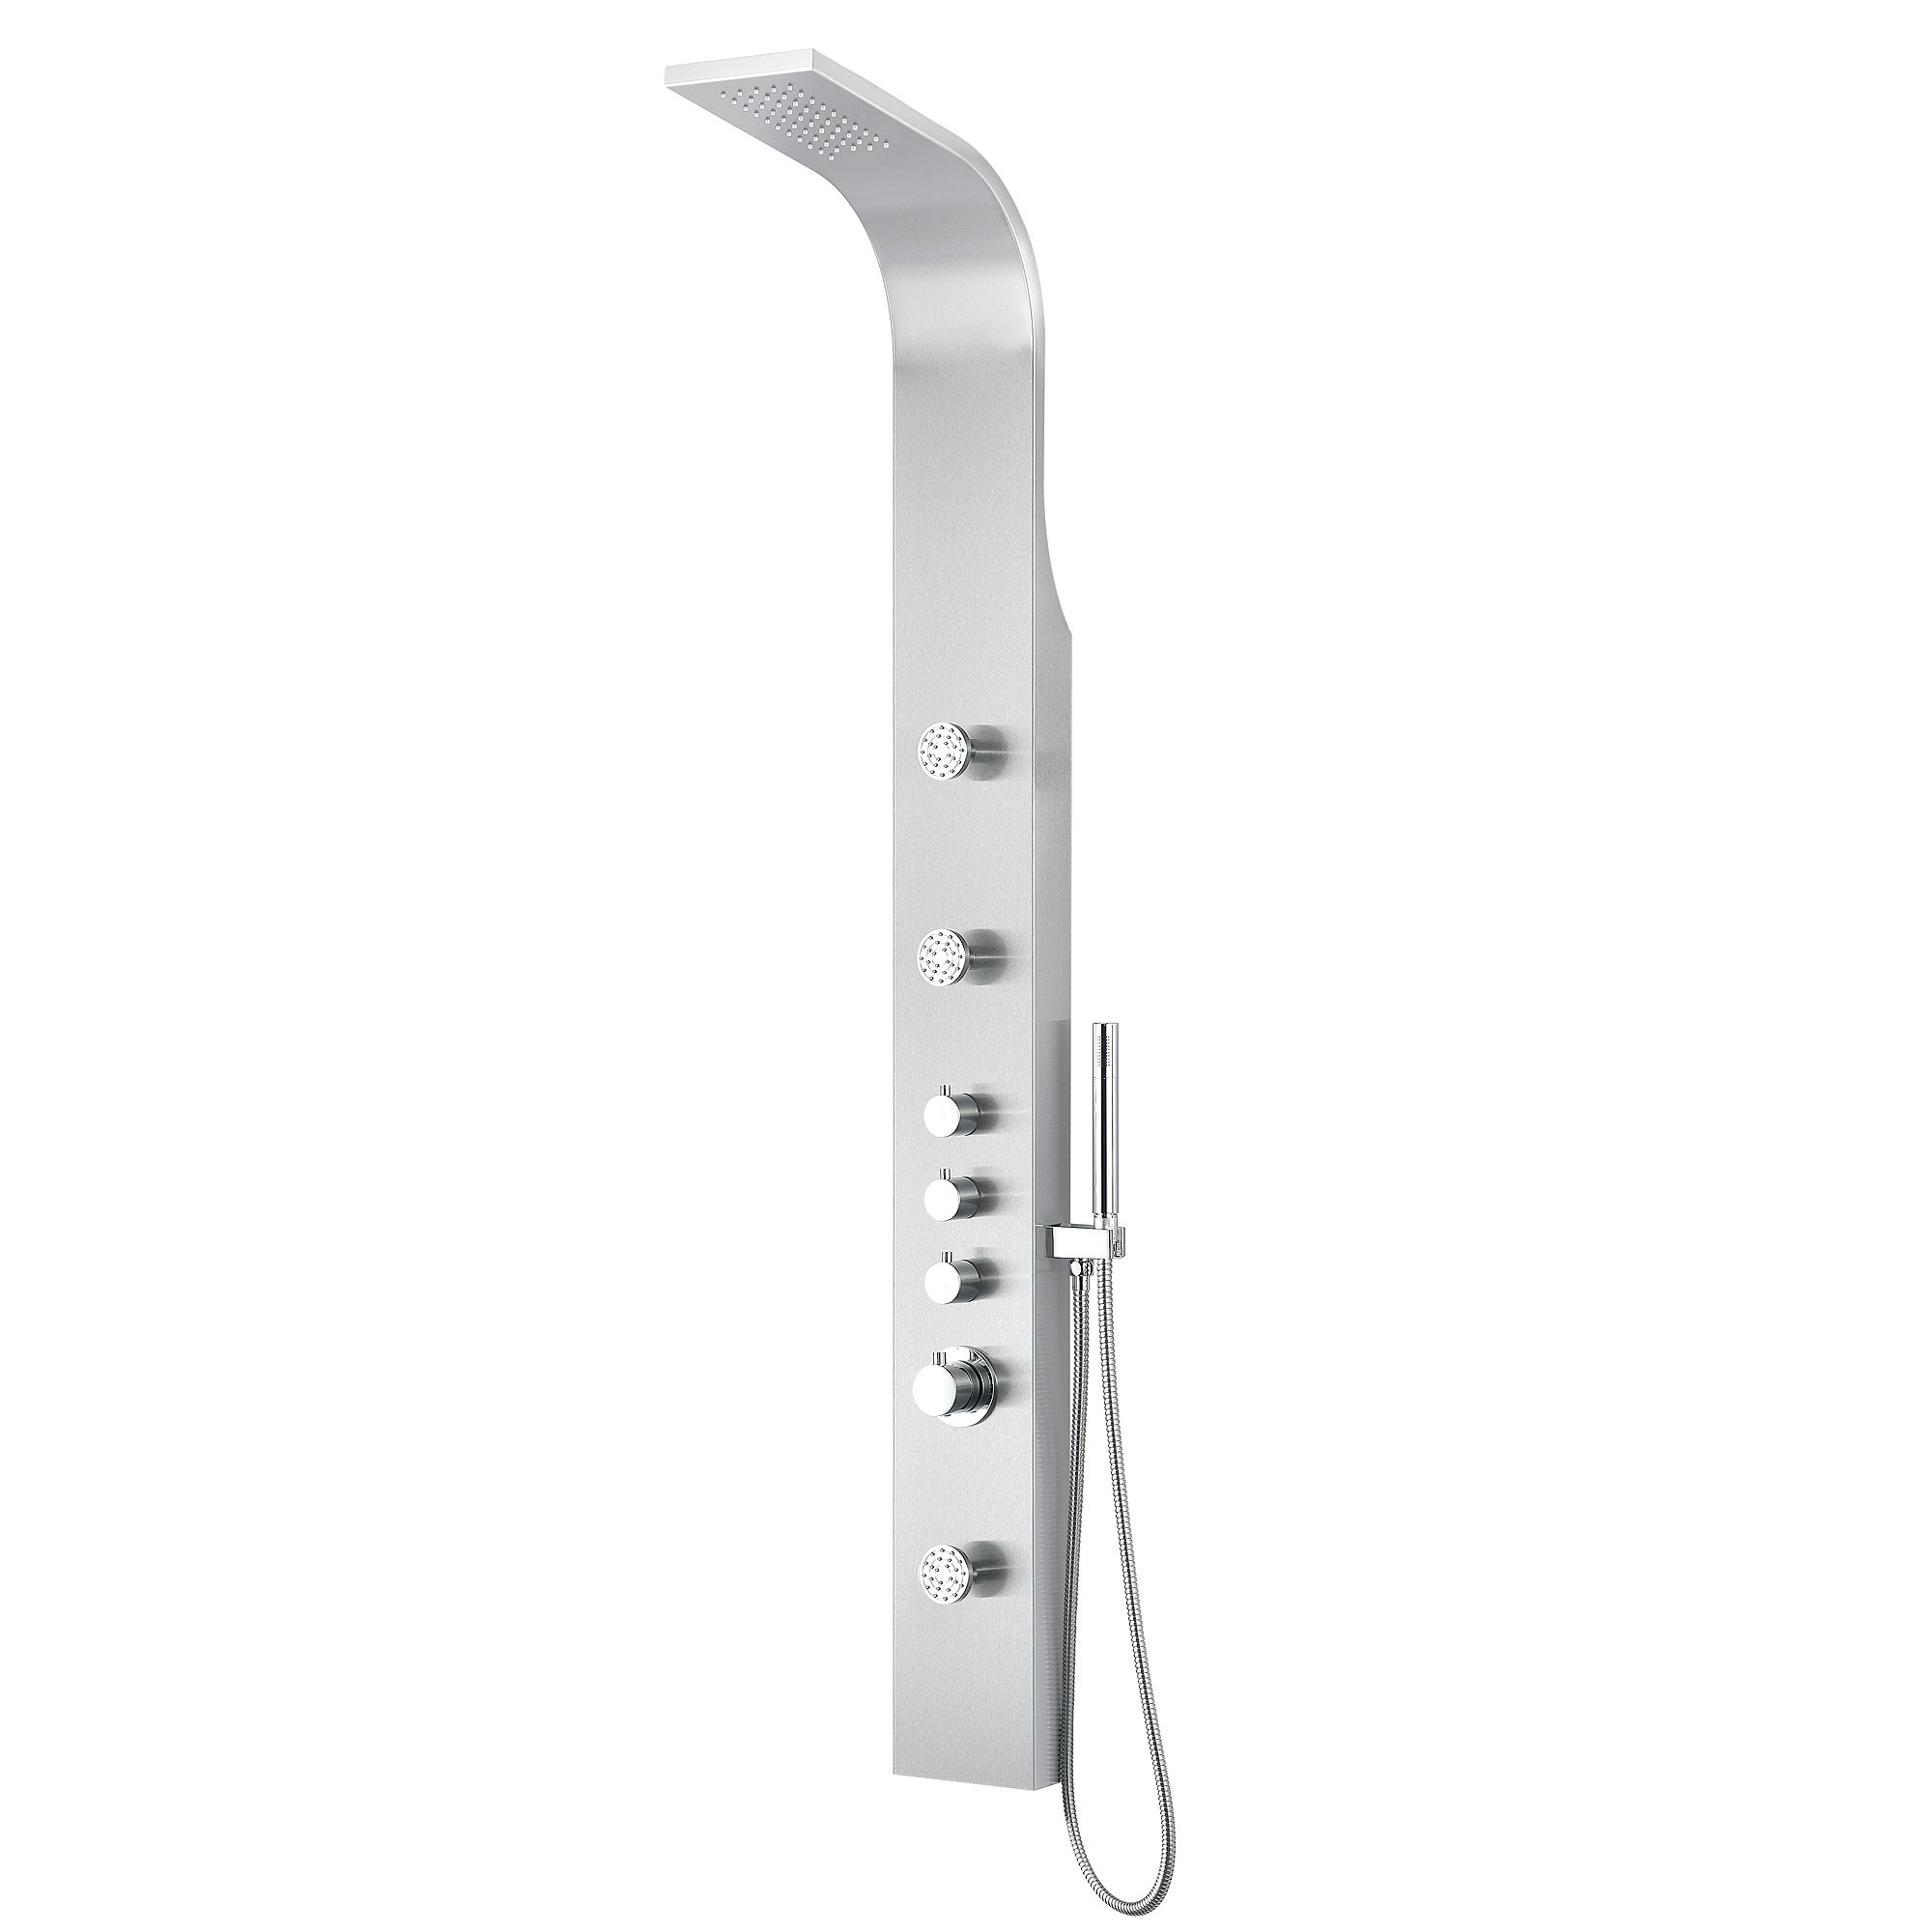 ANZZI SP-AZ036 Starlet Wall Mount Shower Panel In Brushed Stainless Steel